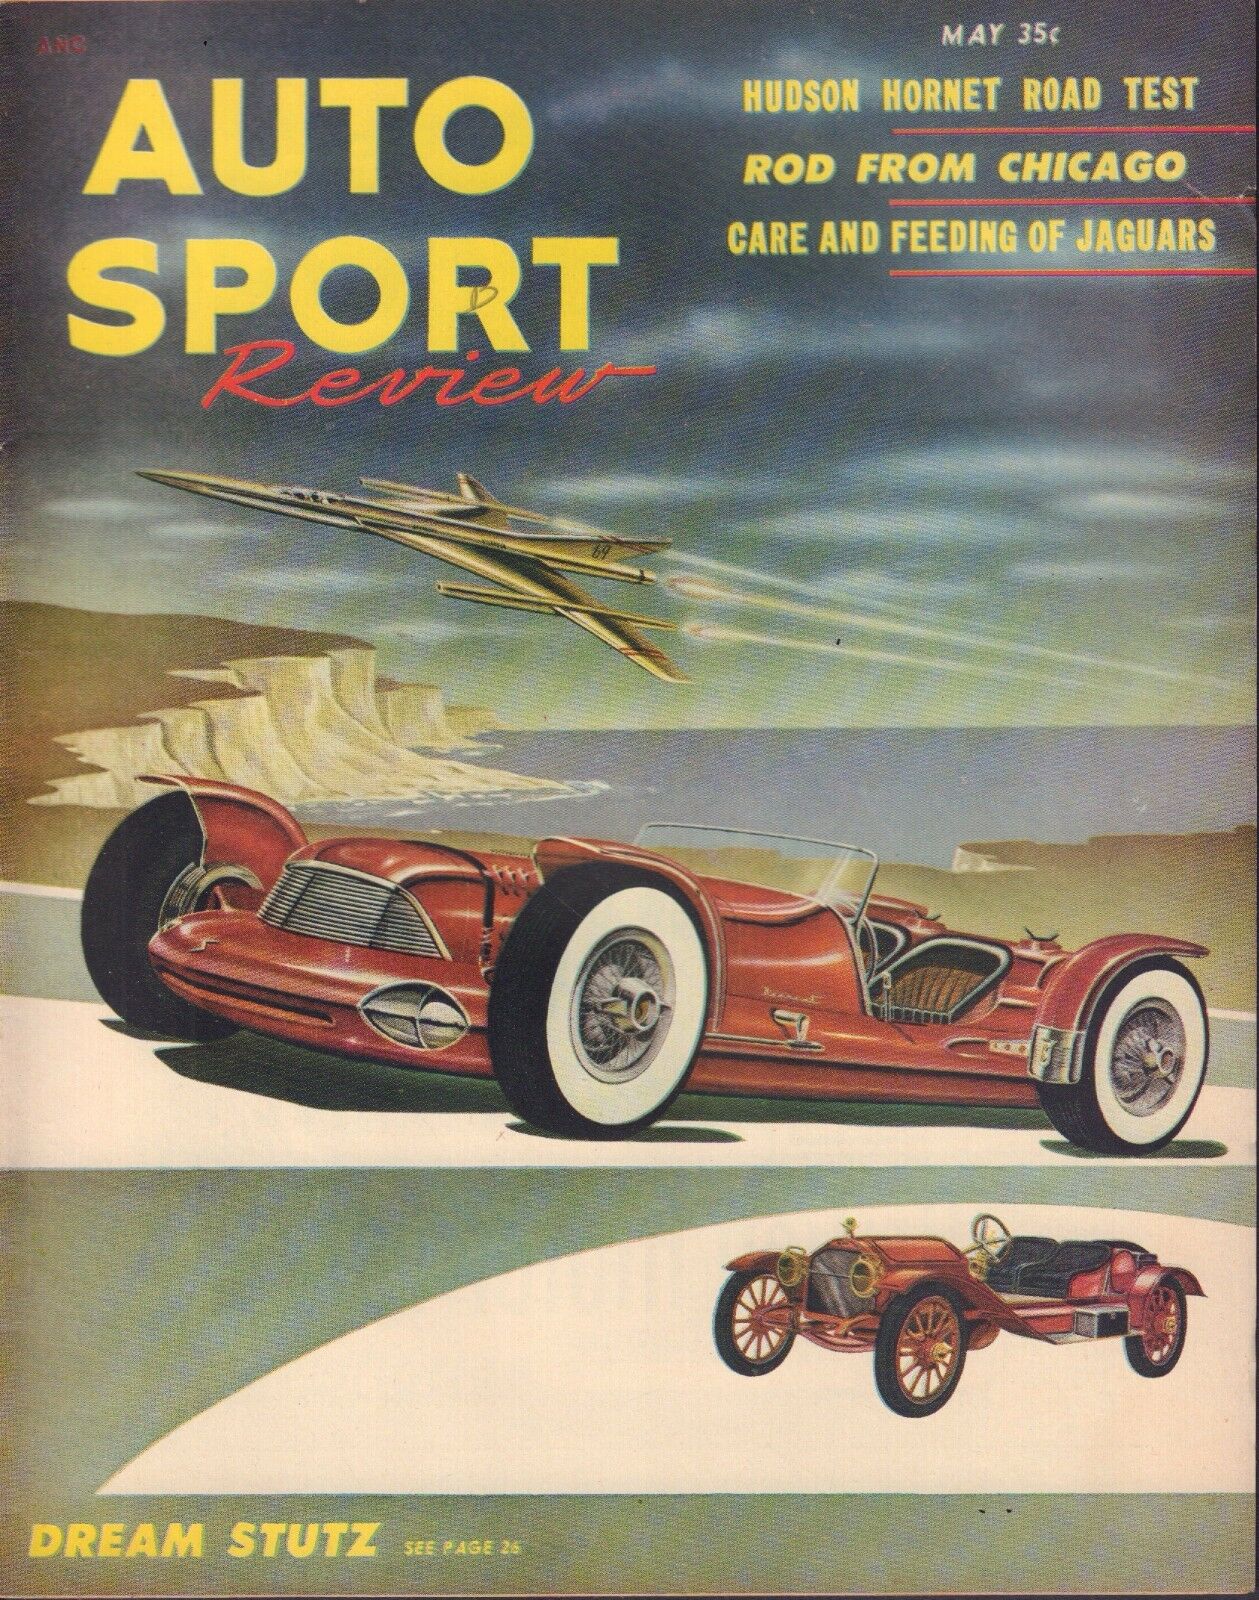 Auto Sport Review # 1, May 1953 magazine back issue Auto Sport Review magizine back copy Auto Sport Review # 1, May 1953 Car Racing Auto Mobile Magazine Back Issue Published by Motorsport. Hudson Hornet Road Test.